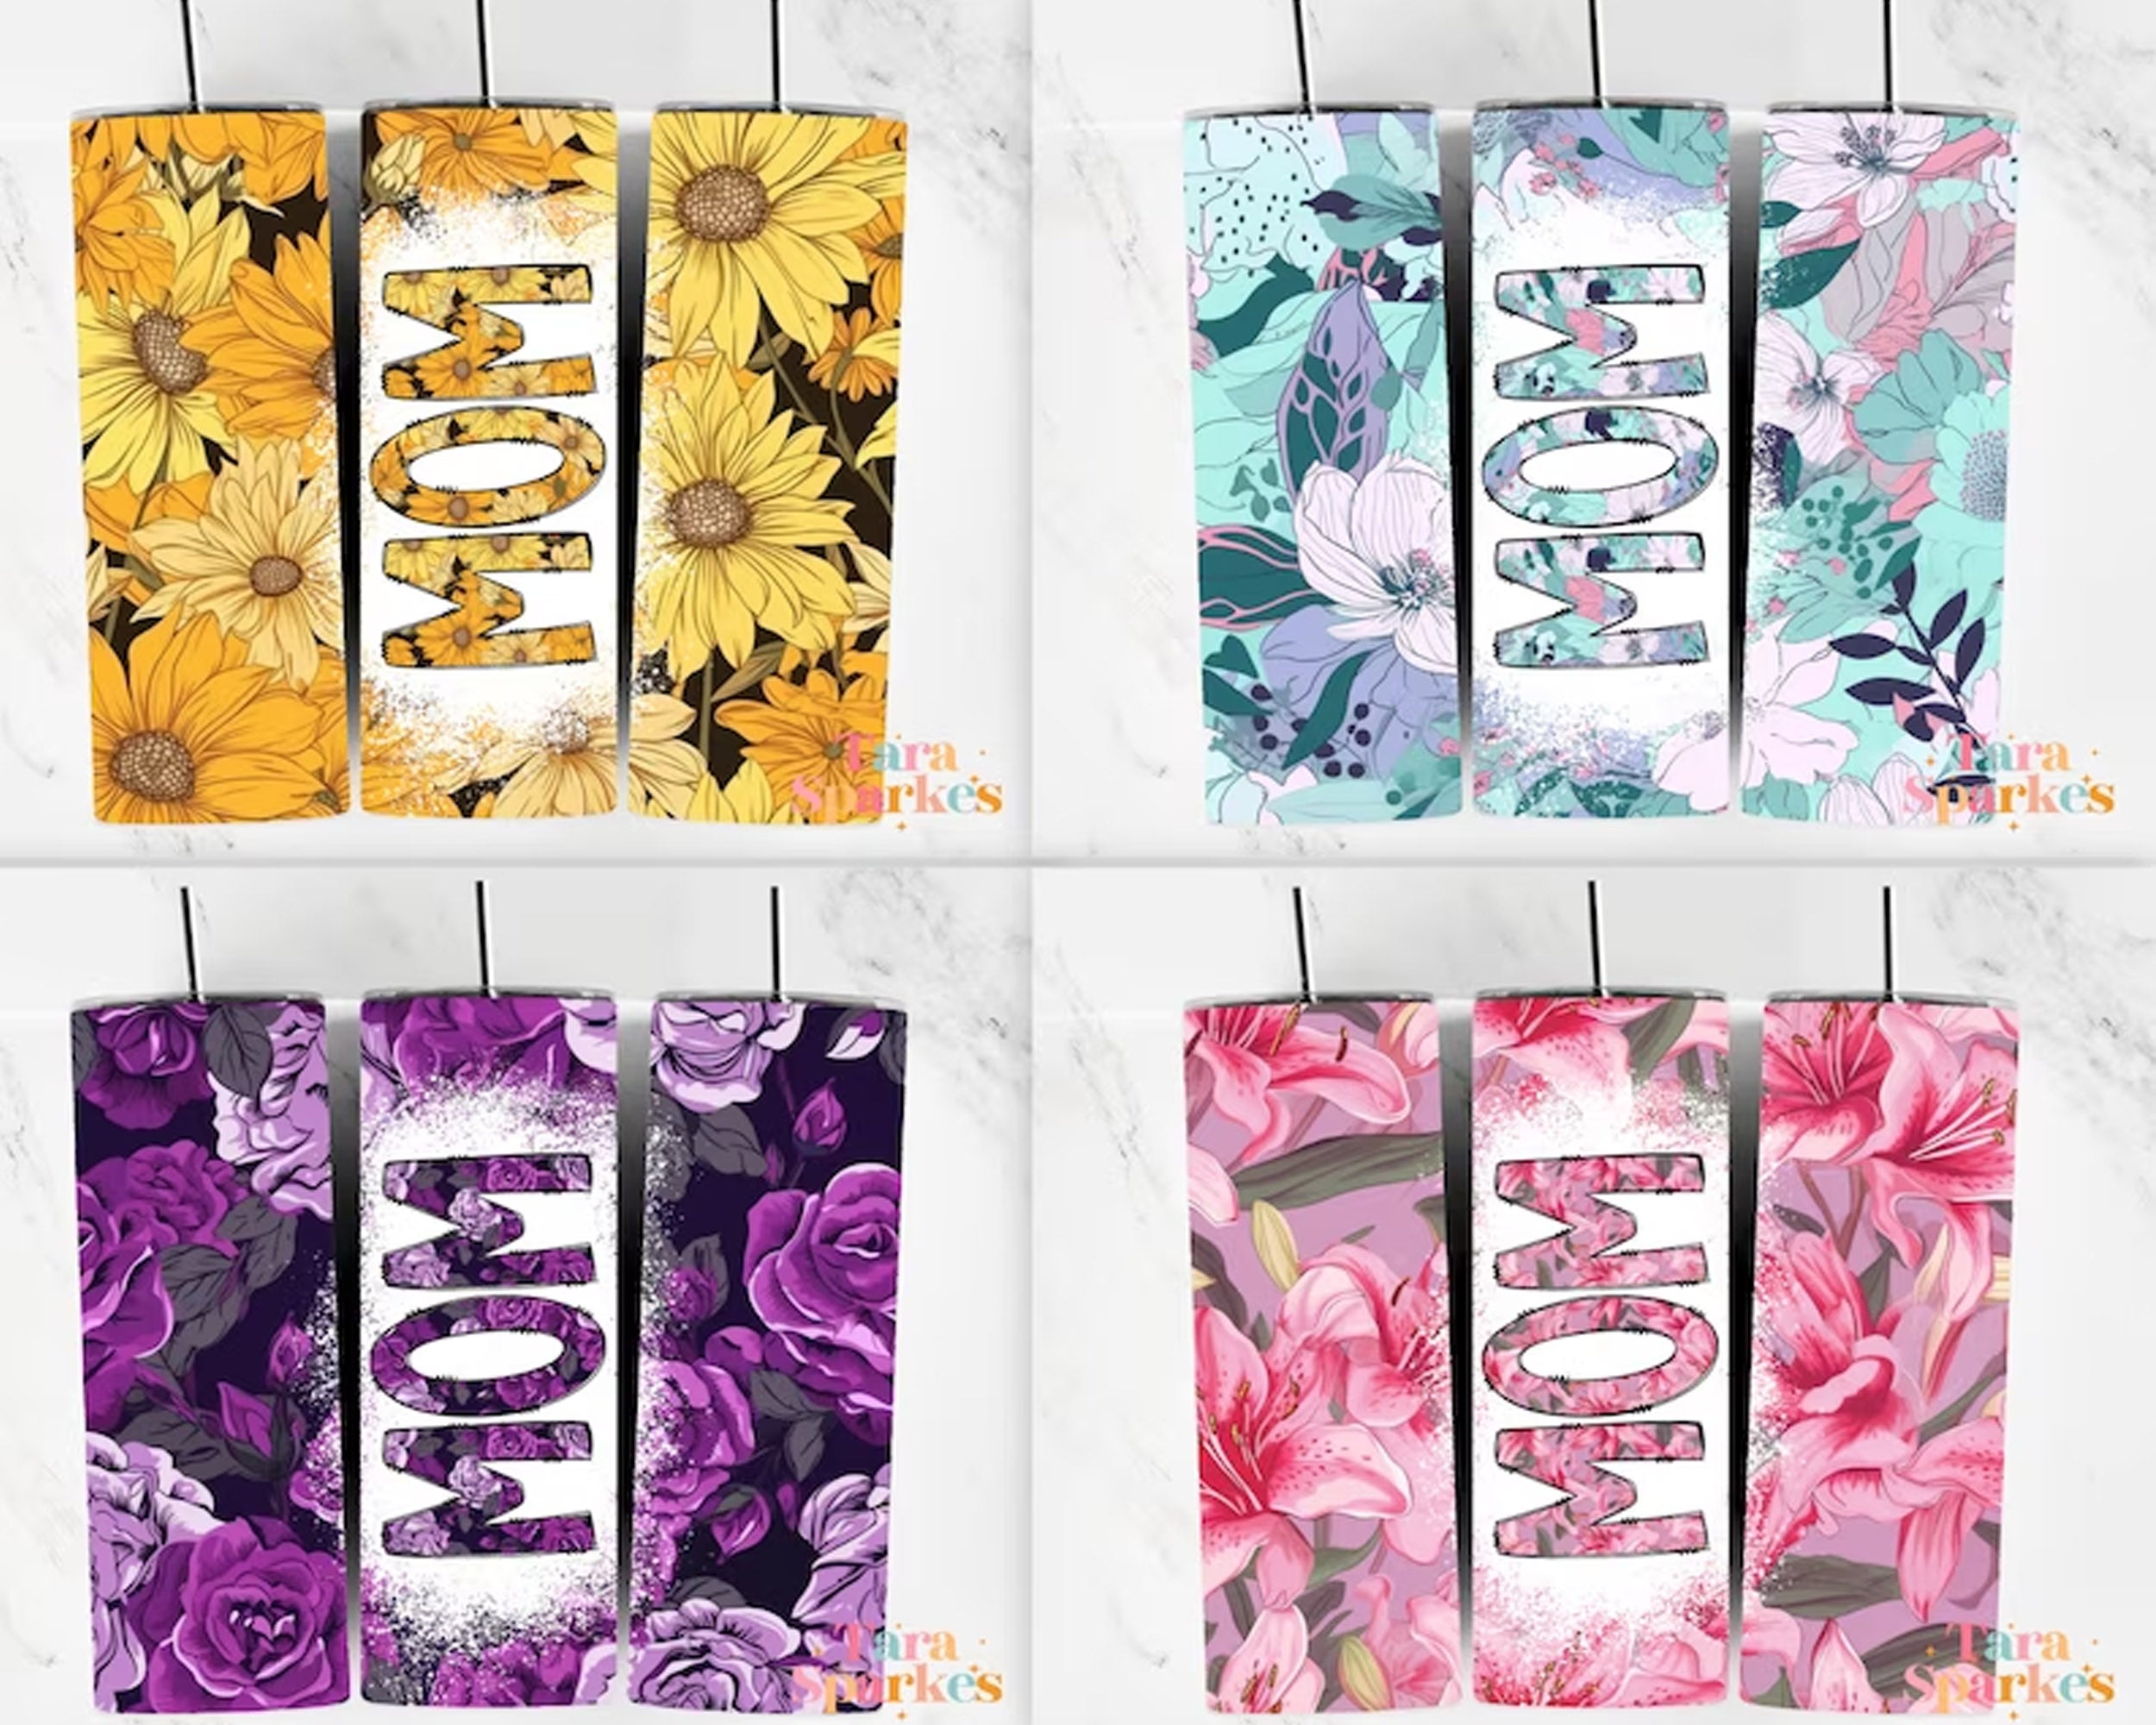 Mother's Day Tumbler Wrap bundle, Instant Download